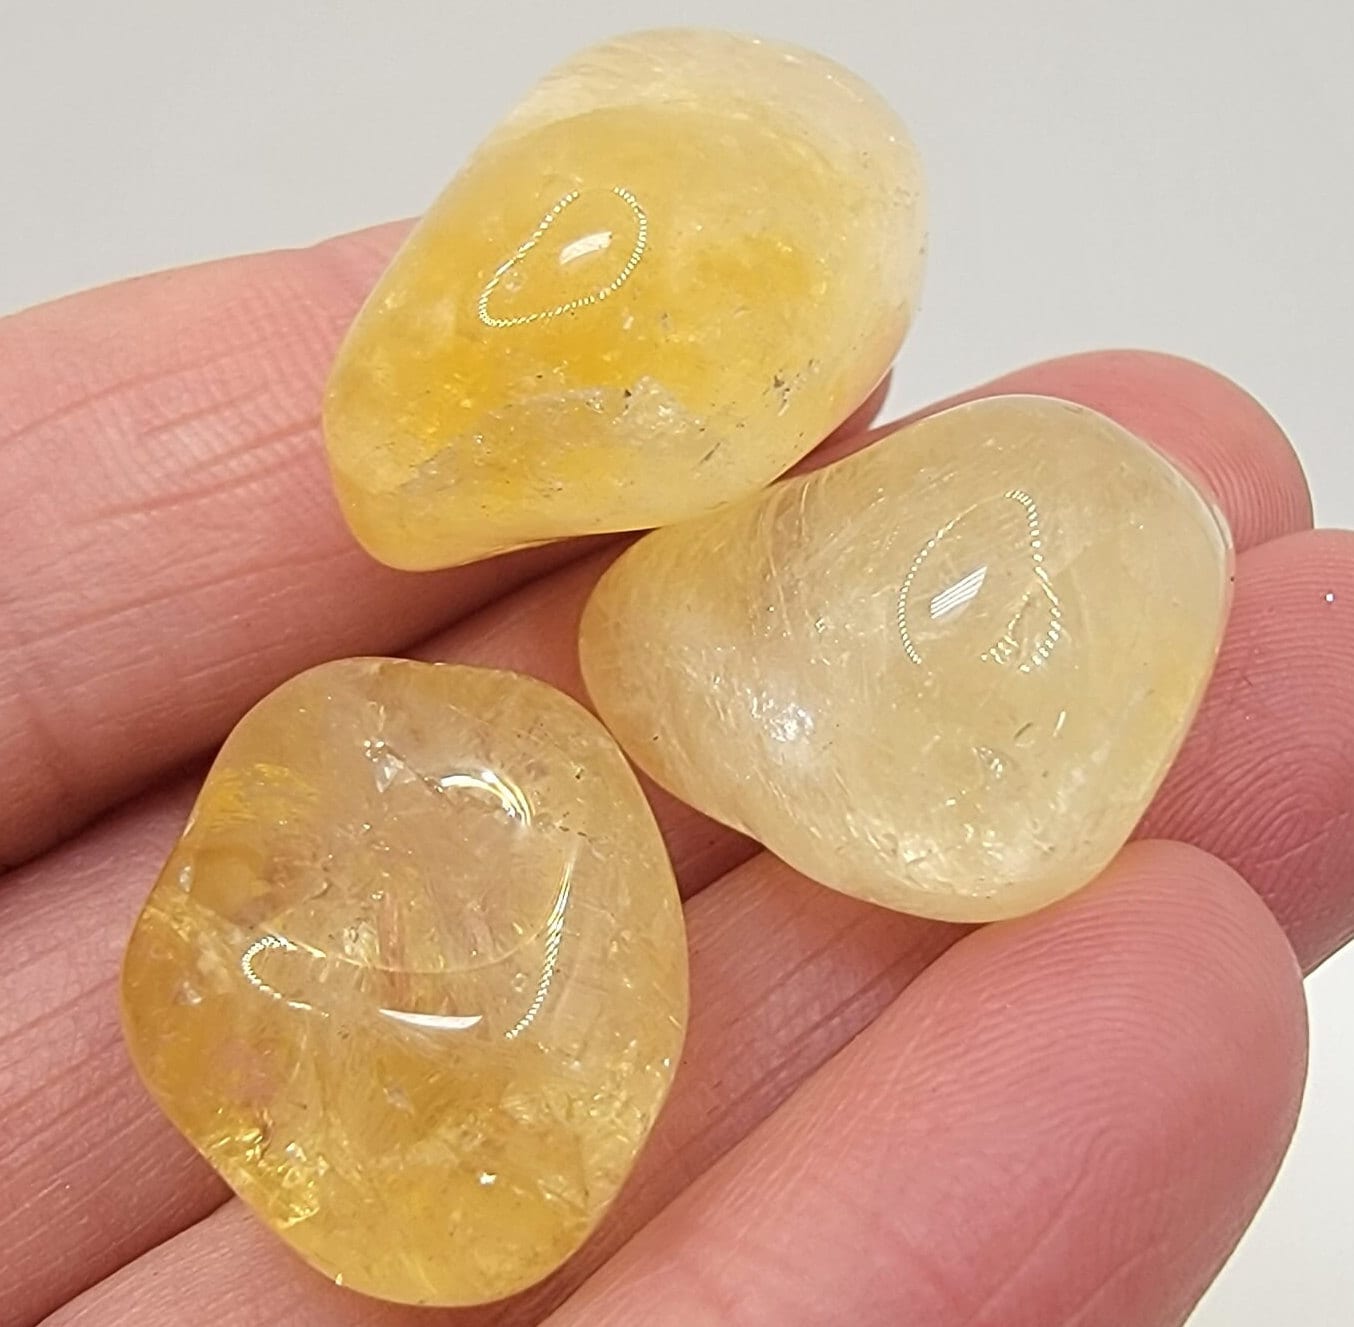 Citrine, Polished Tumbled Crystal (Approx. 5/8" - 1") Yellow Stone, for Wire Wrapping or Crystal Grid Supply BIN-1294